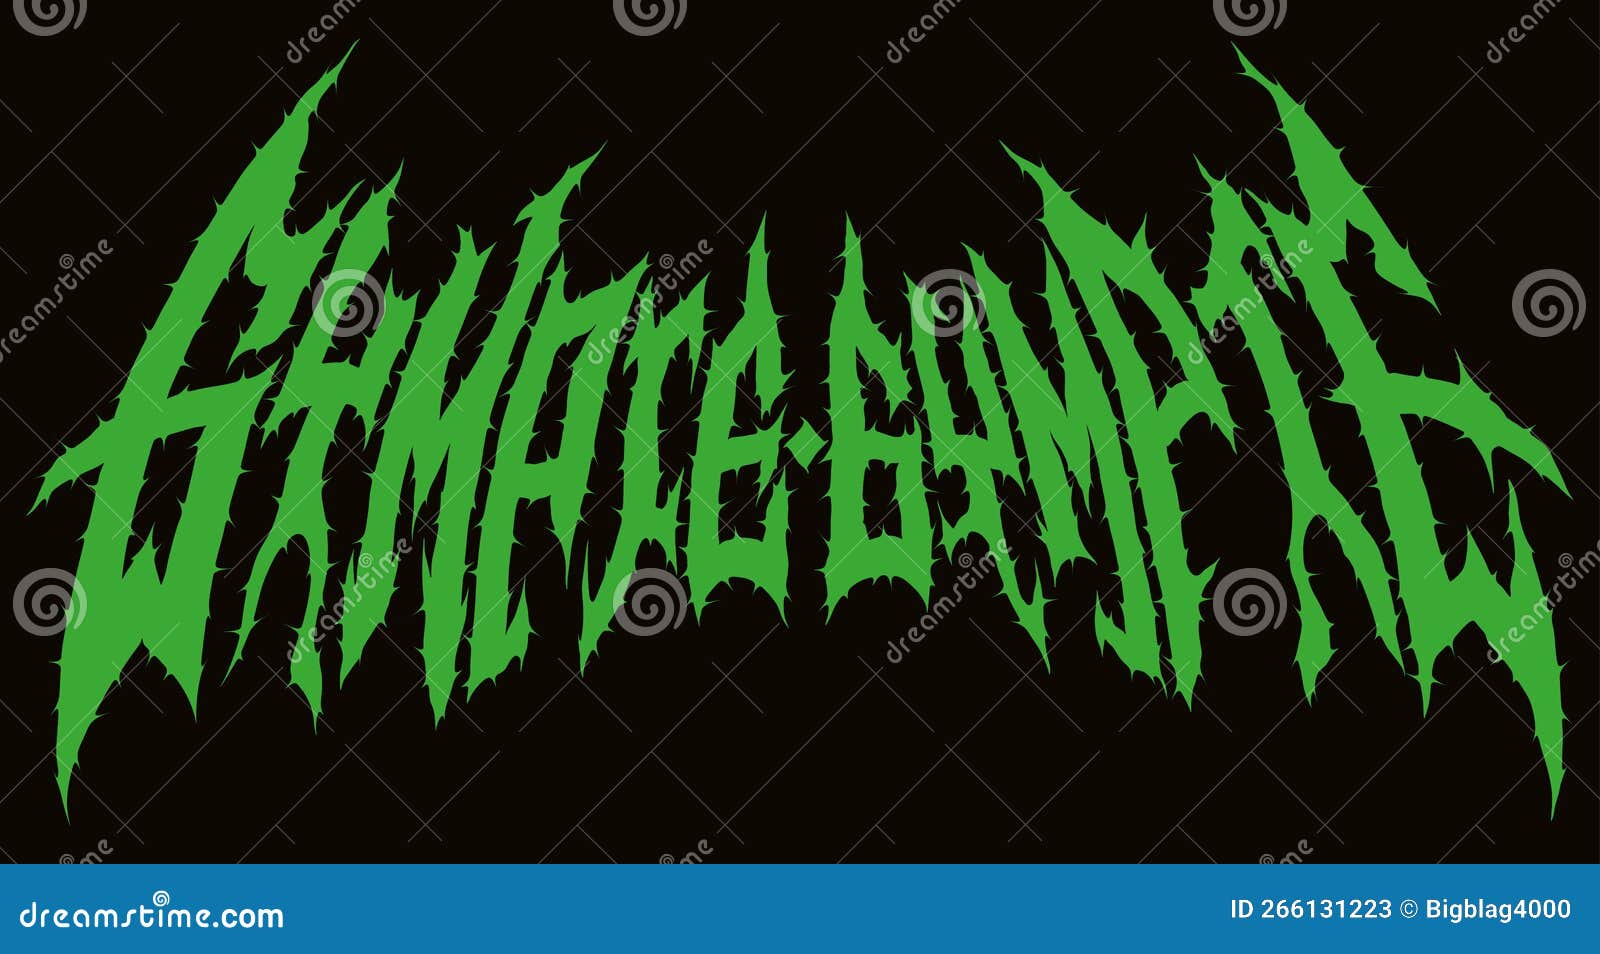 gympie-gympie.metal music style lettering. custom font.